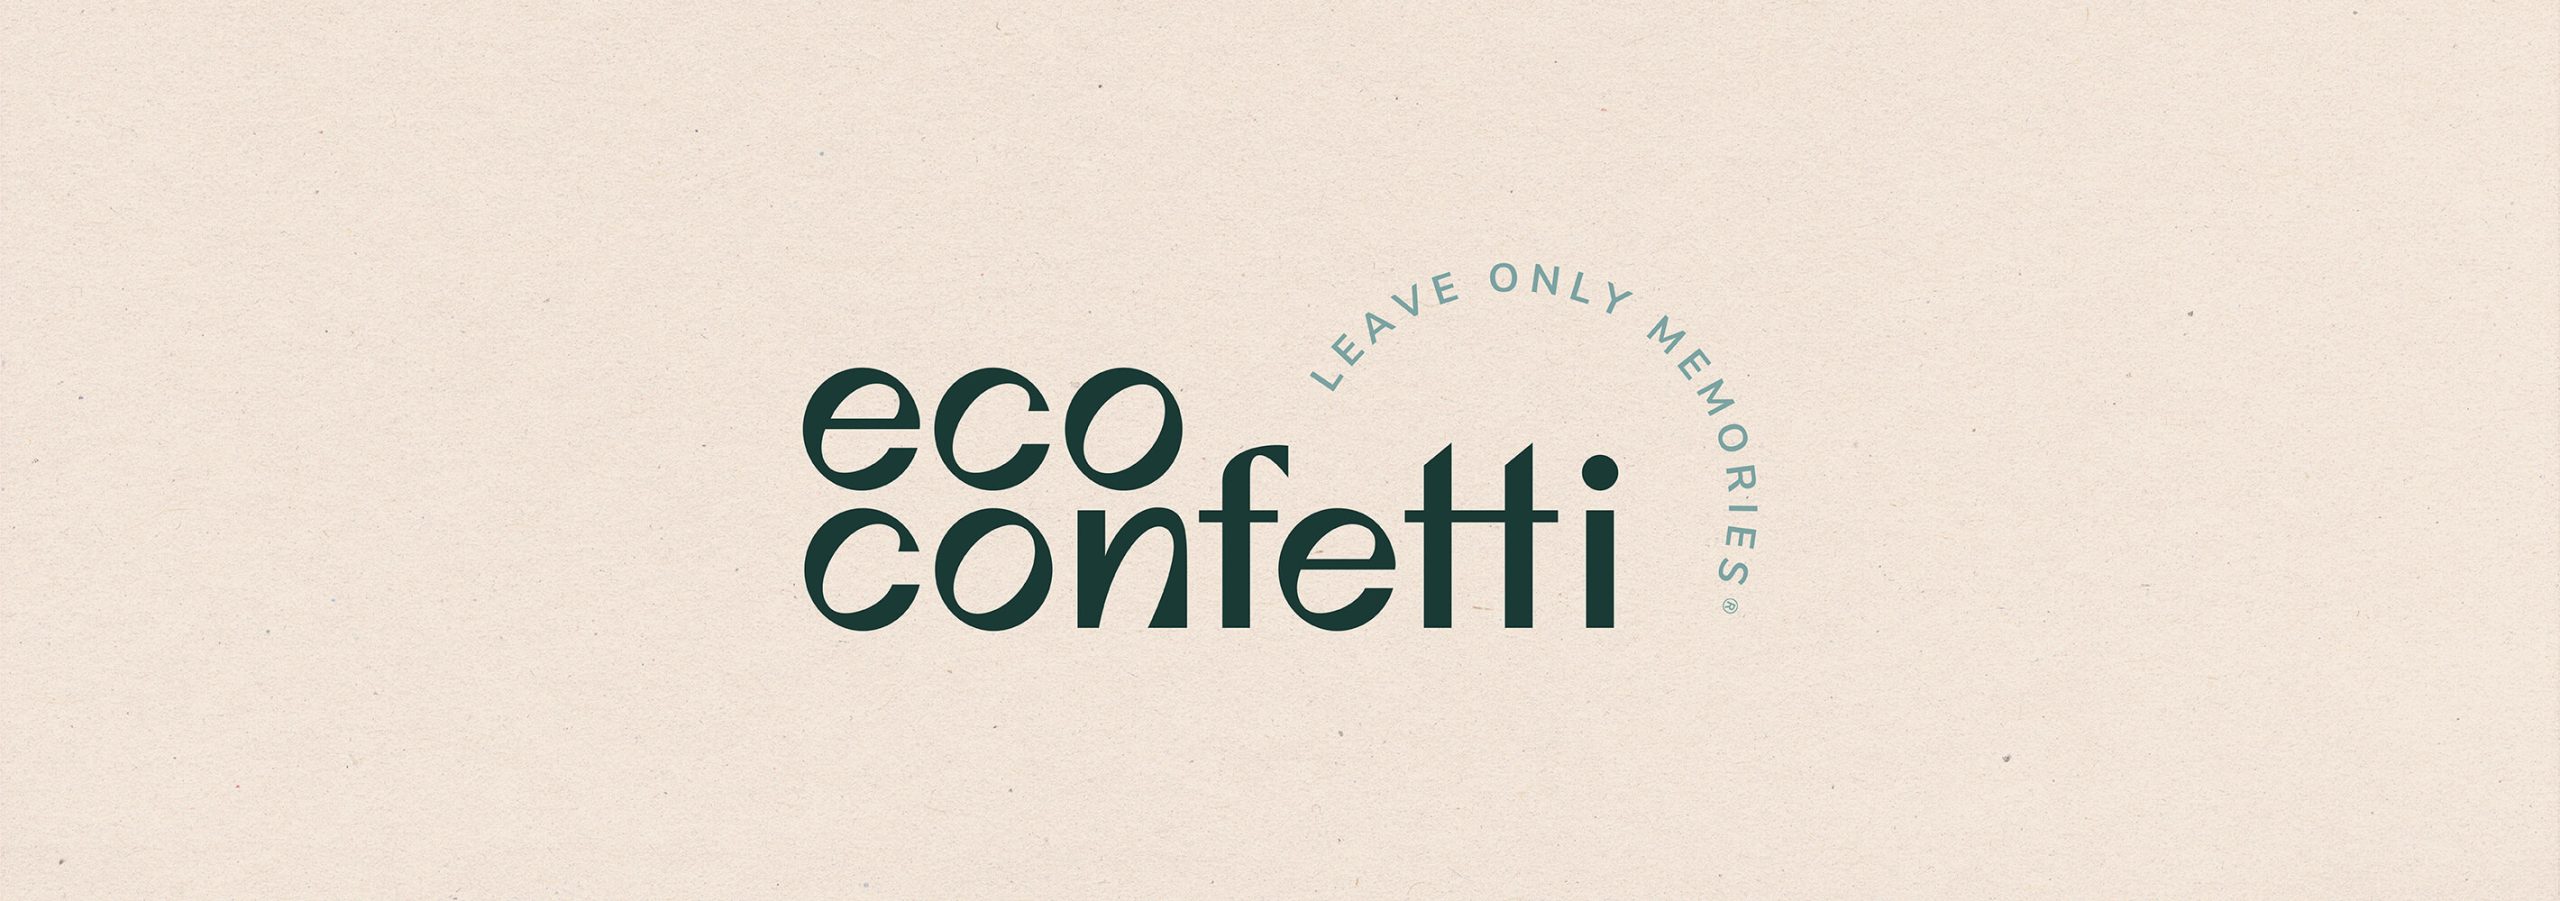 Rebranding case study image of the Eco Confetti logo on a create coloured background. The lower-case sans-serif logo features rounded styling inline with a retro Italian feel with the brand tagline ‘leave only memories’ arching above it.